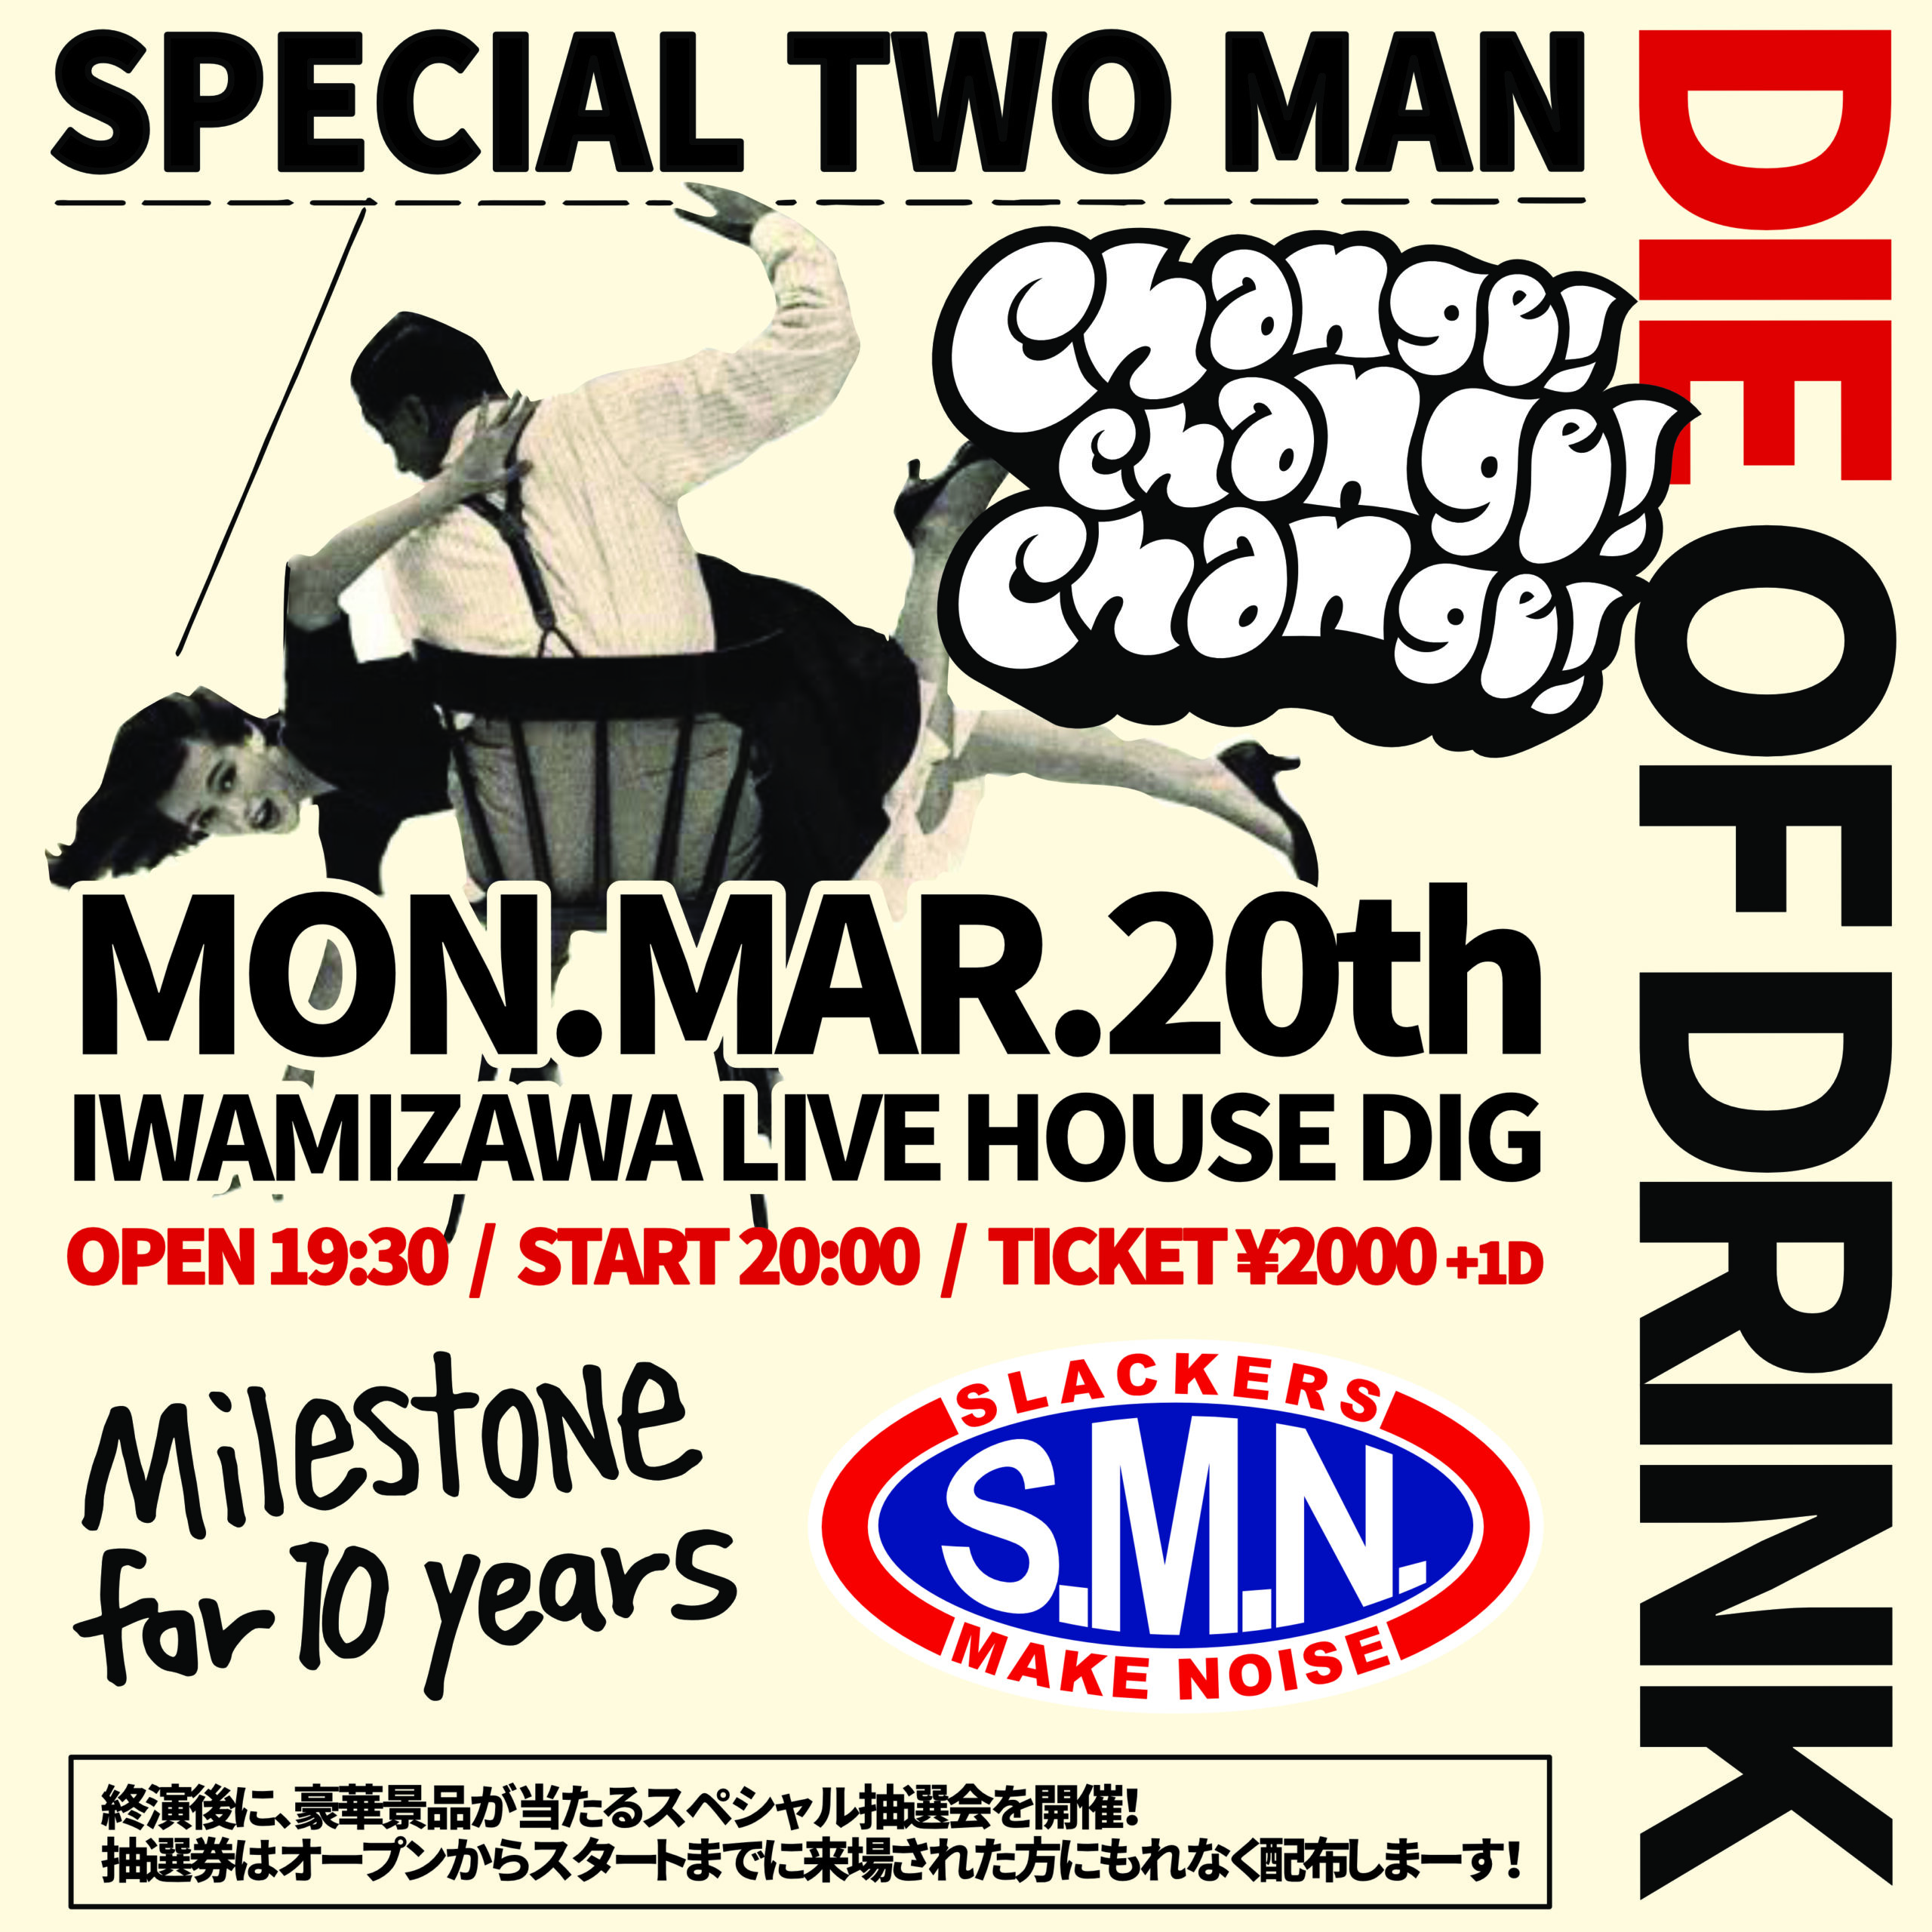 “DIE OF DRINK” x “CHANGE!! CHANGE!! CHANGE!!” ~SPECIAL TWO MAN~